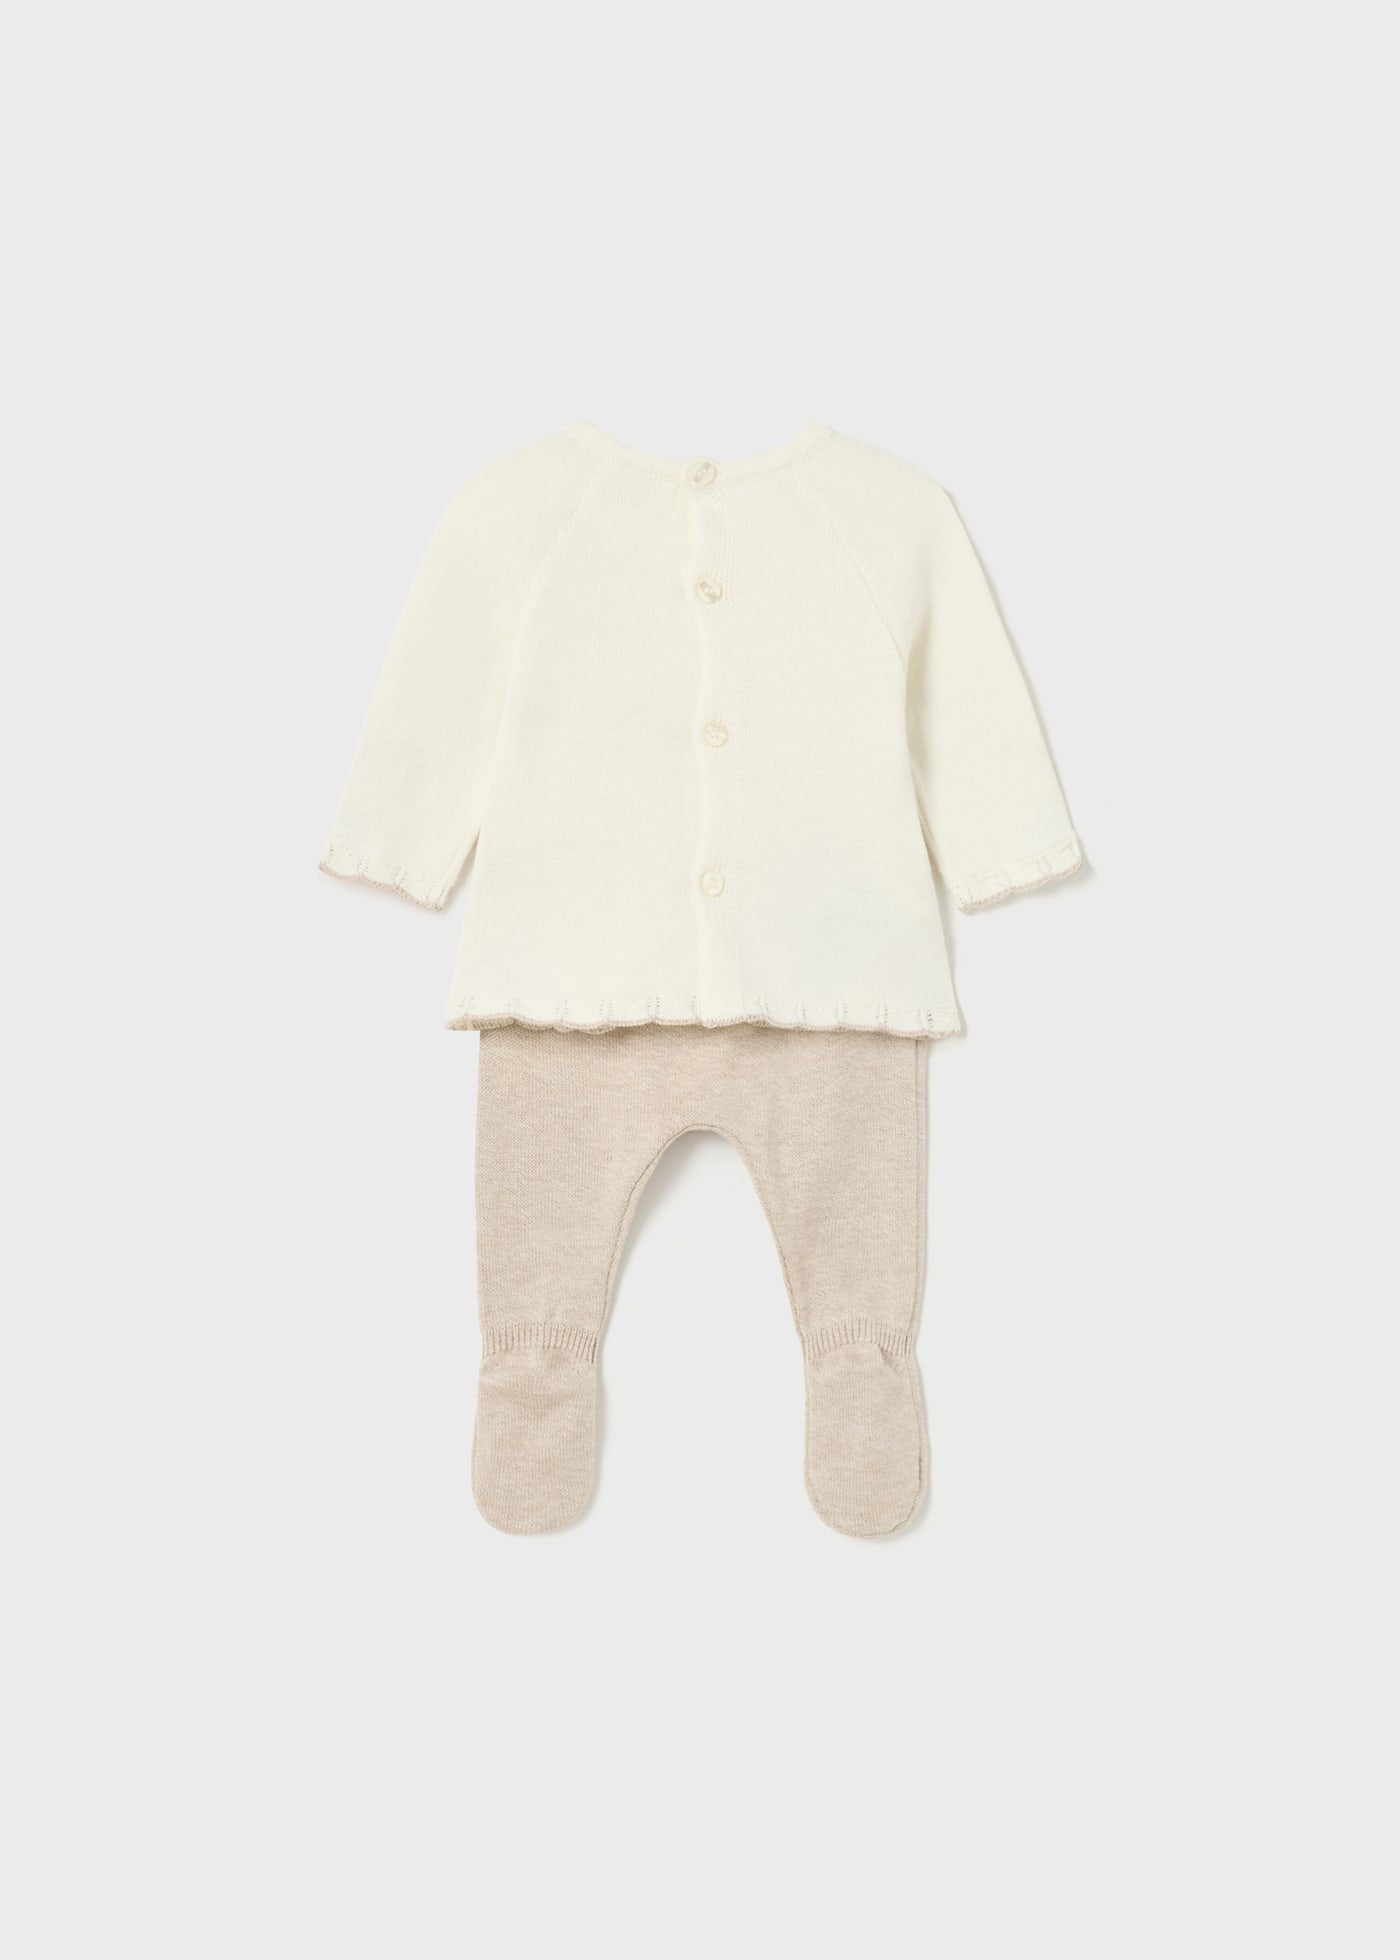 Mayoral Baby L/S Knit Top & Footed Leggings Set _Beige 1504-053